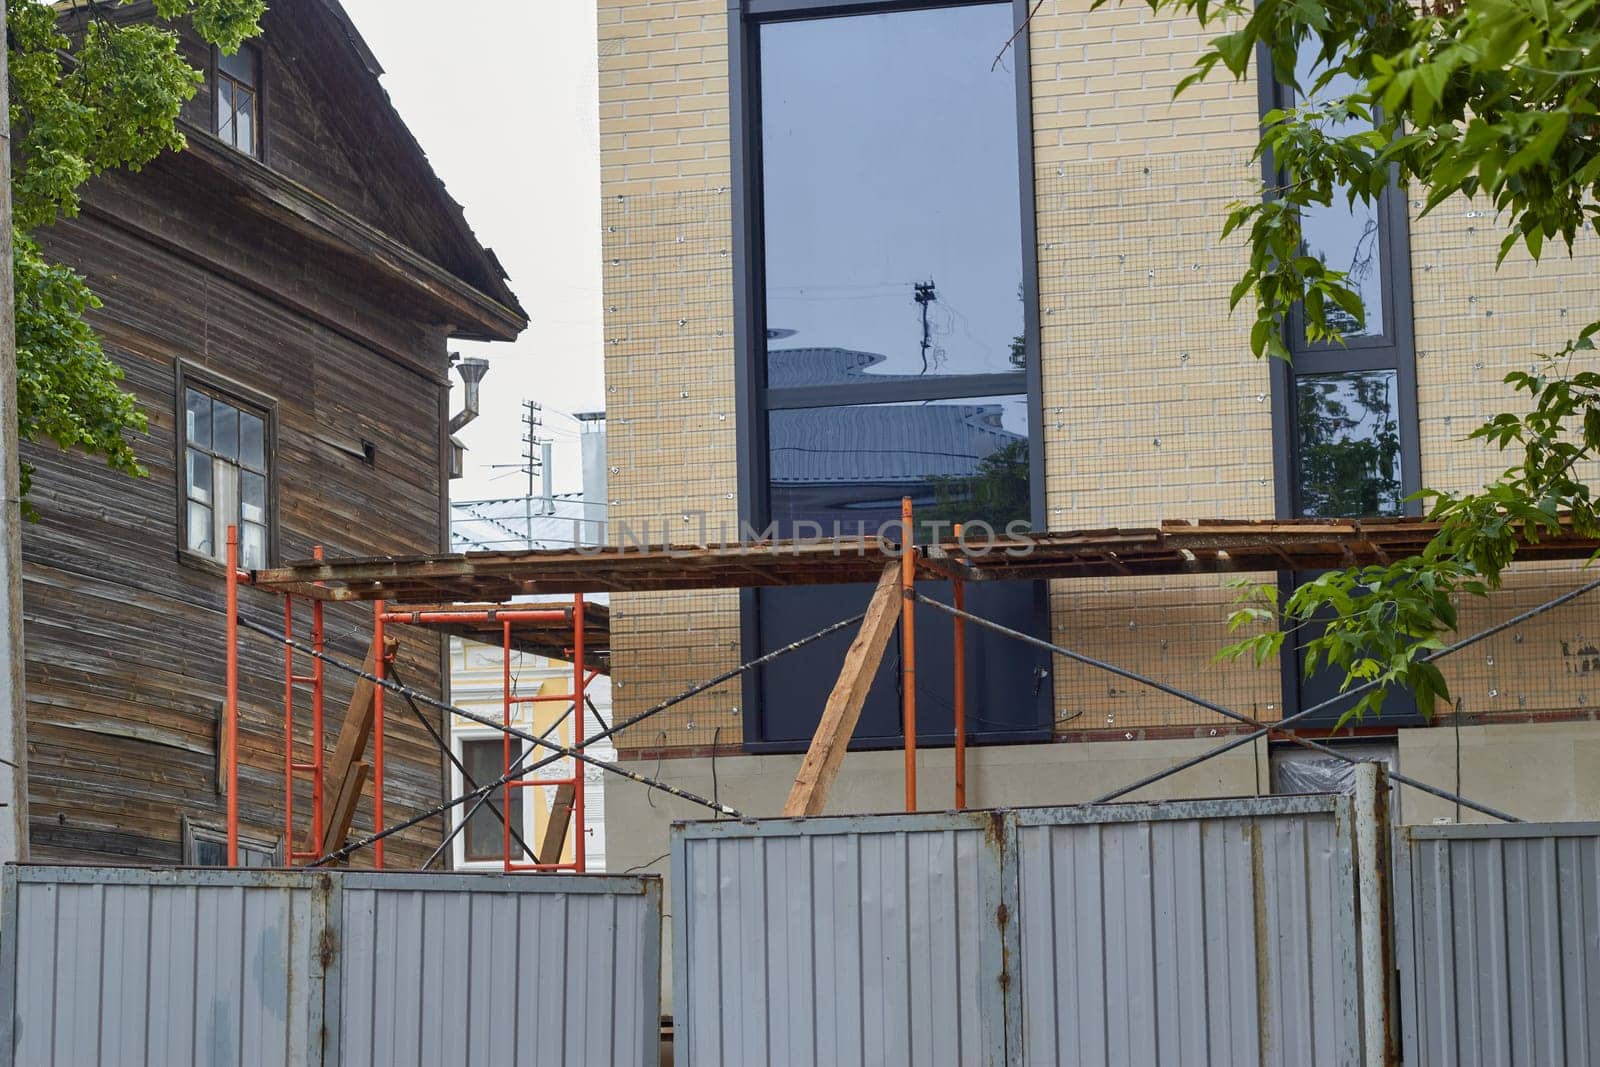 Photo of scaffolding and facades of buildings with fence. Construction and repair.